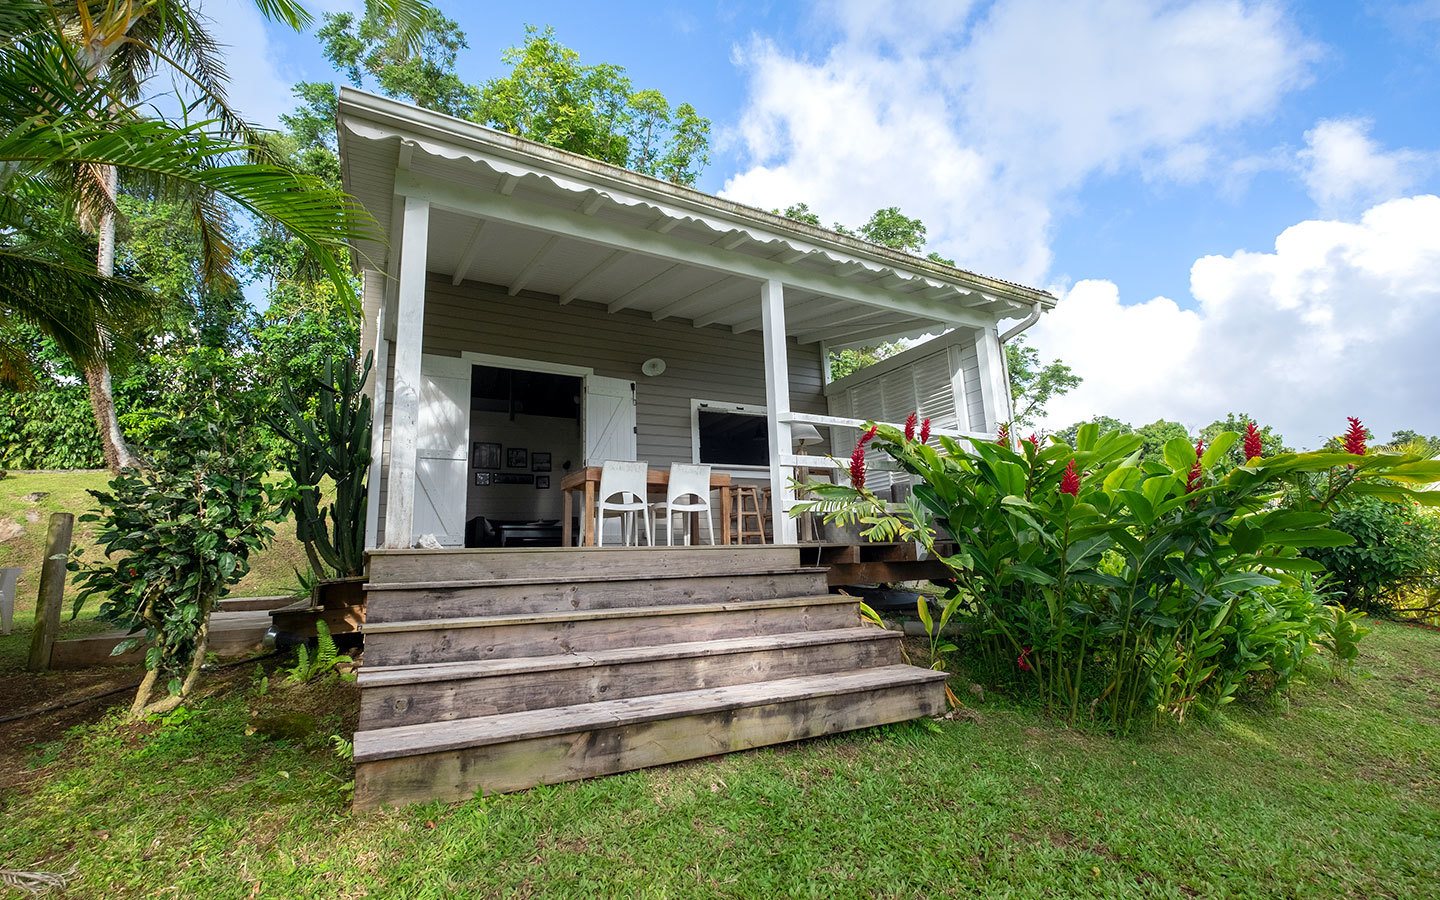 AirBnB cabin in the hills of Basse-Terre, Guadeloupe